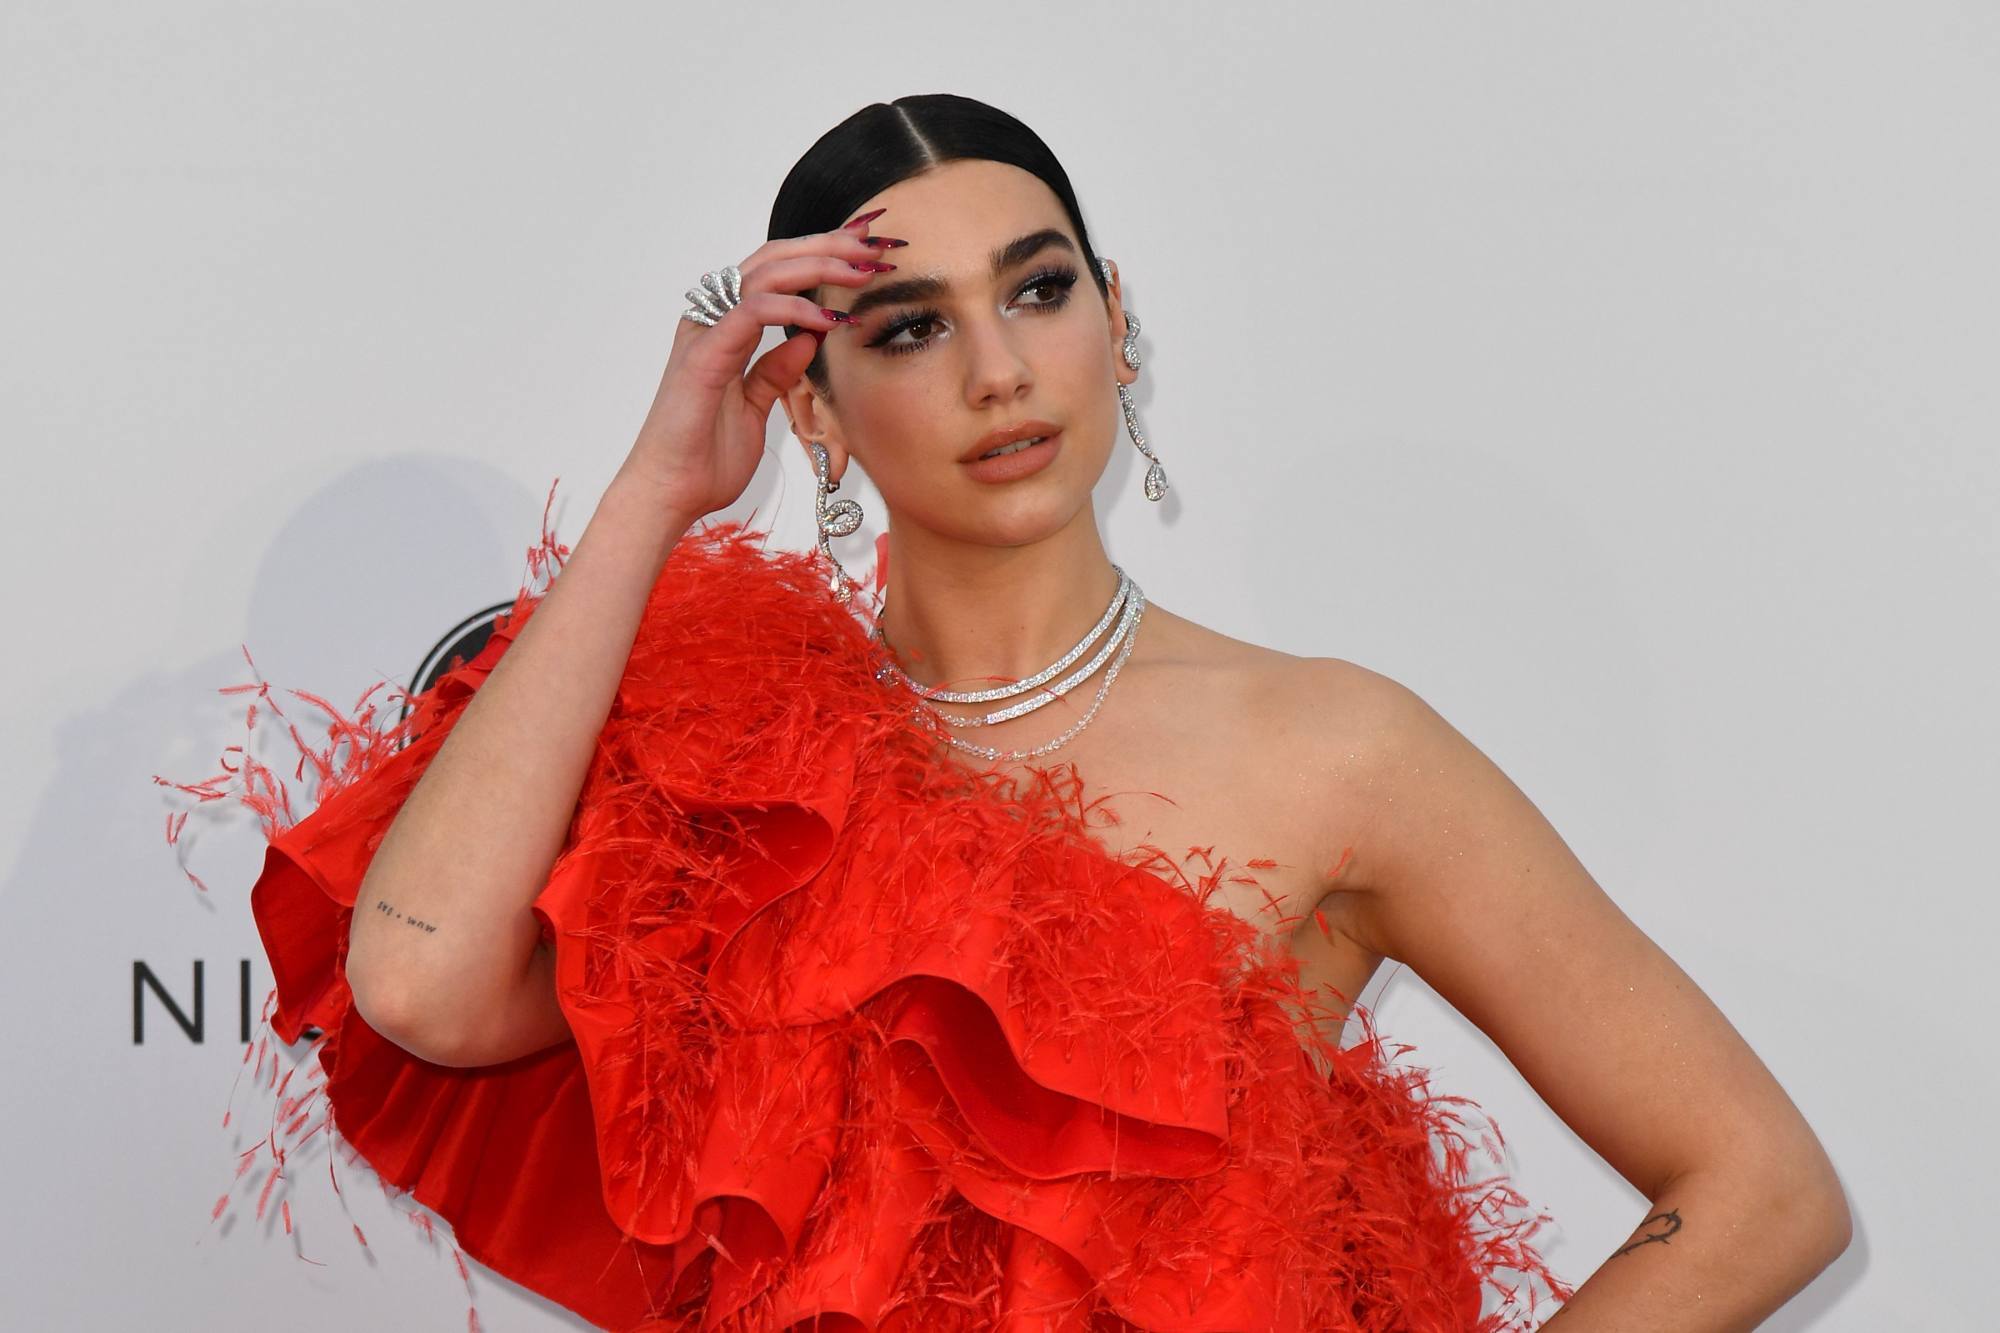 Dua Lipa at the AMFAR 26th Annual Cinema Against Aids gala in May 2019 in Cap d’Antibes, southern France, on the side-lines of the 72nd Cannes Film Festival. Photo: AFP